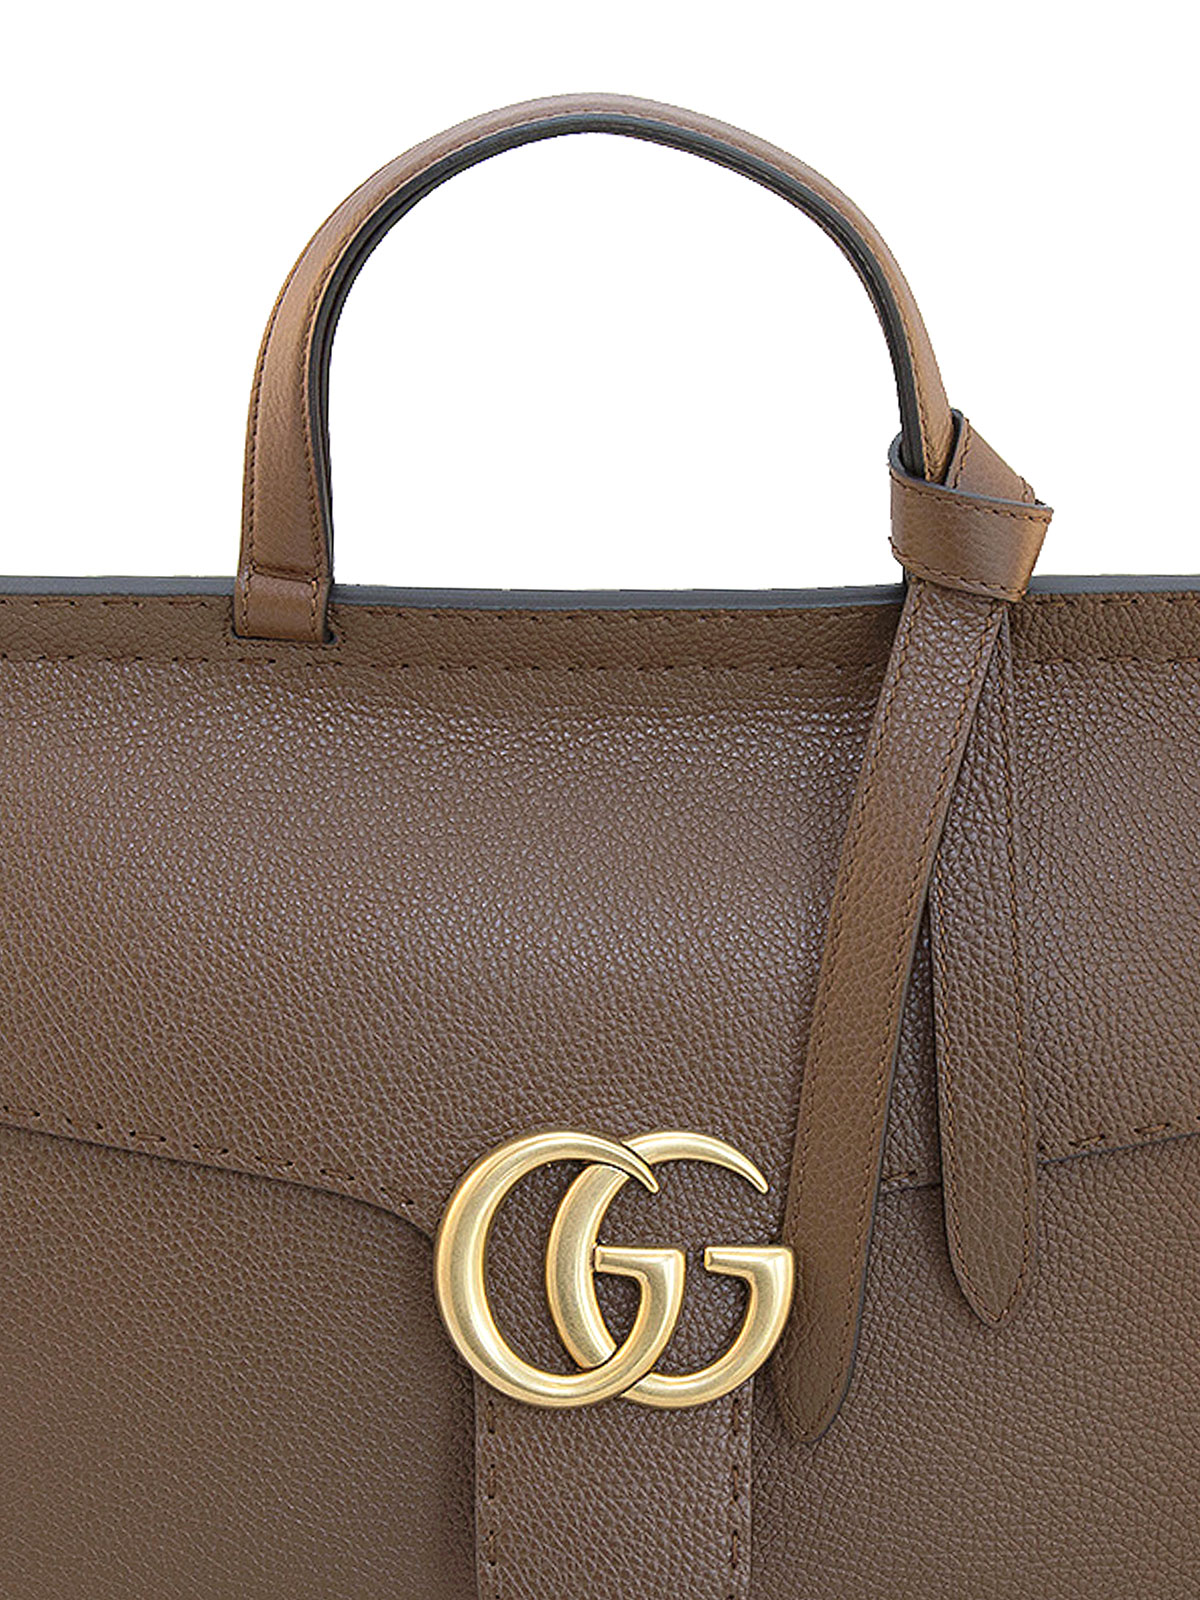 Totes Gucci - Marmont large leather tote 418702A7M0T2548